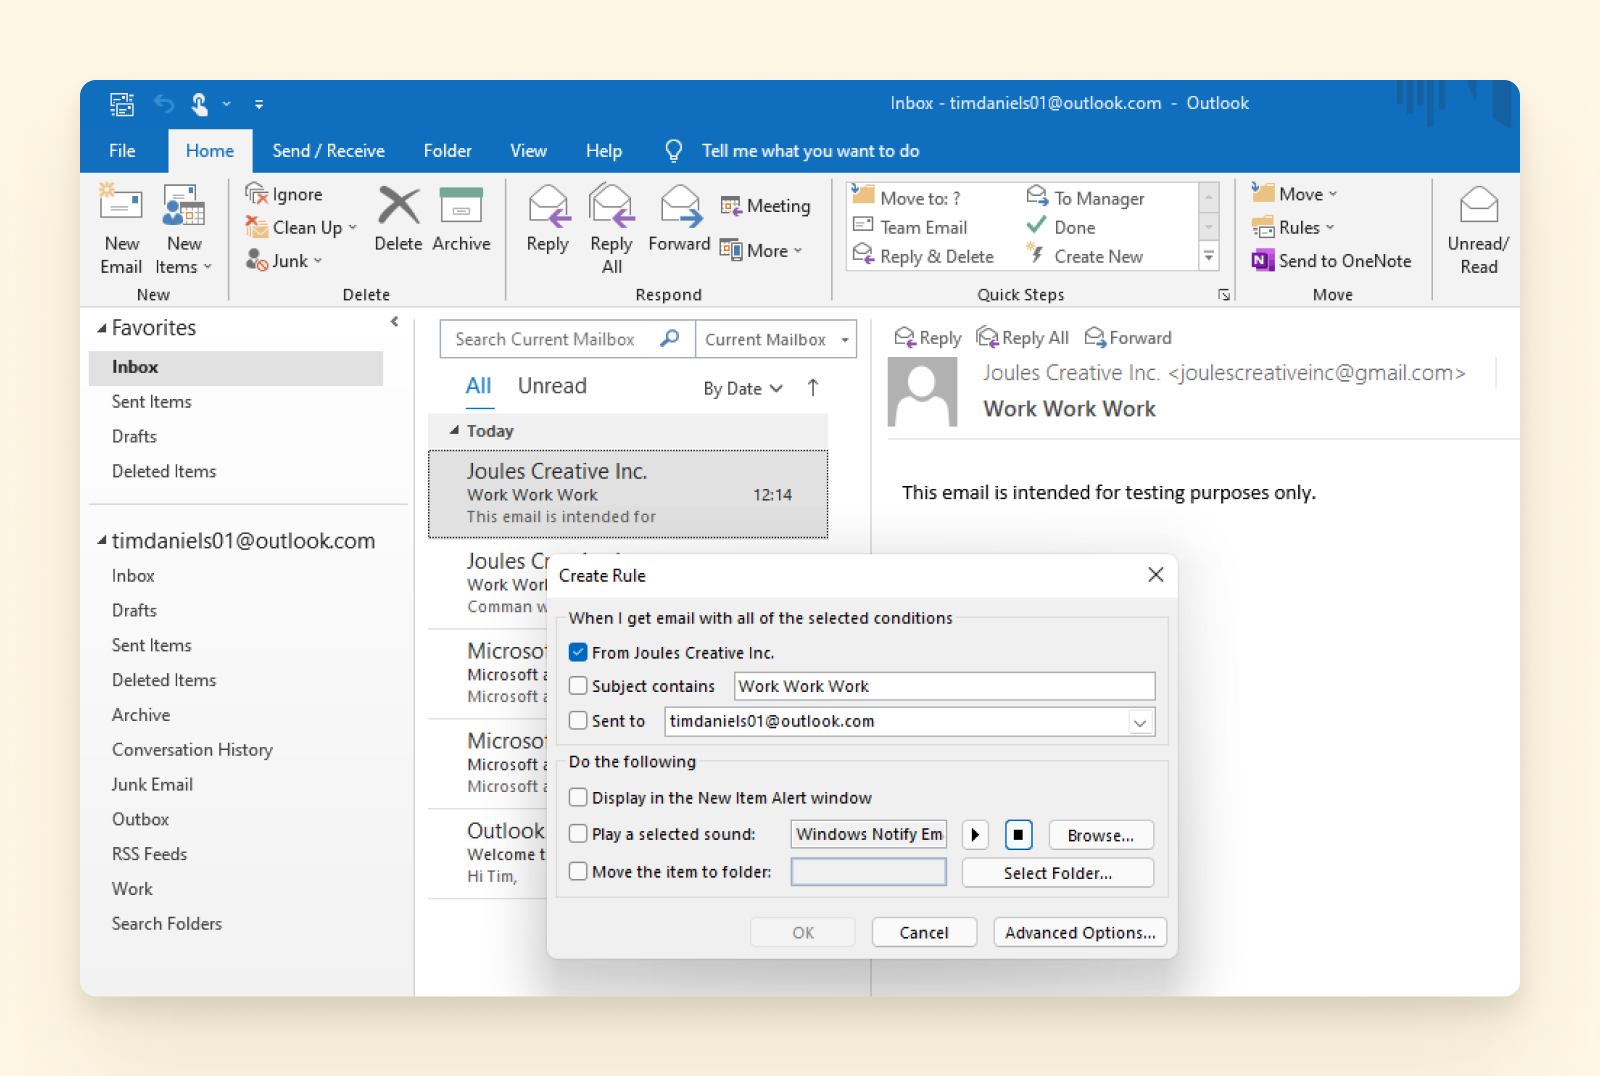 How to Filter Emails in Outlook on Both Desktop and the Web App